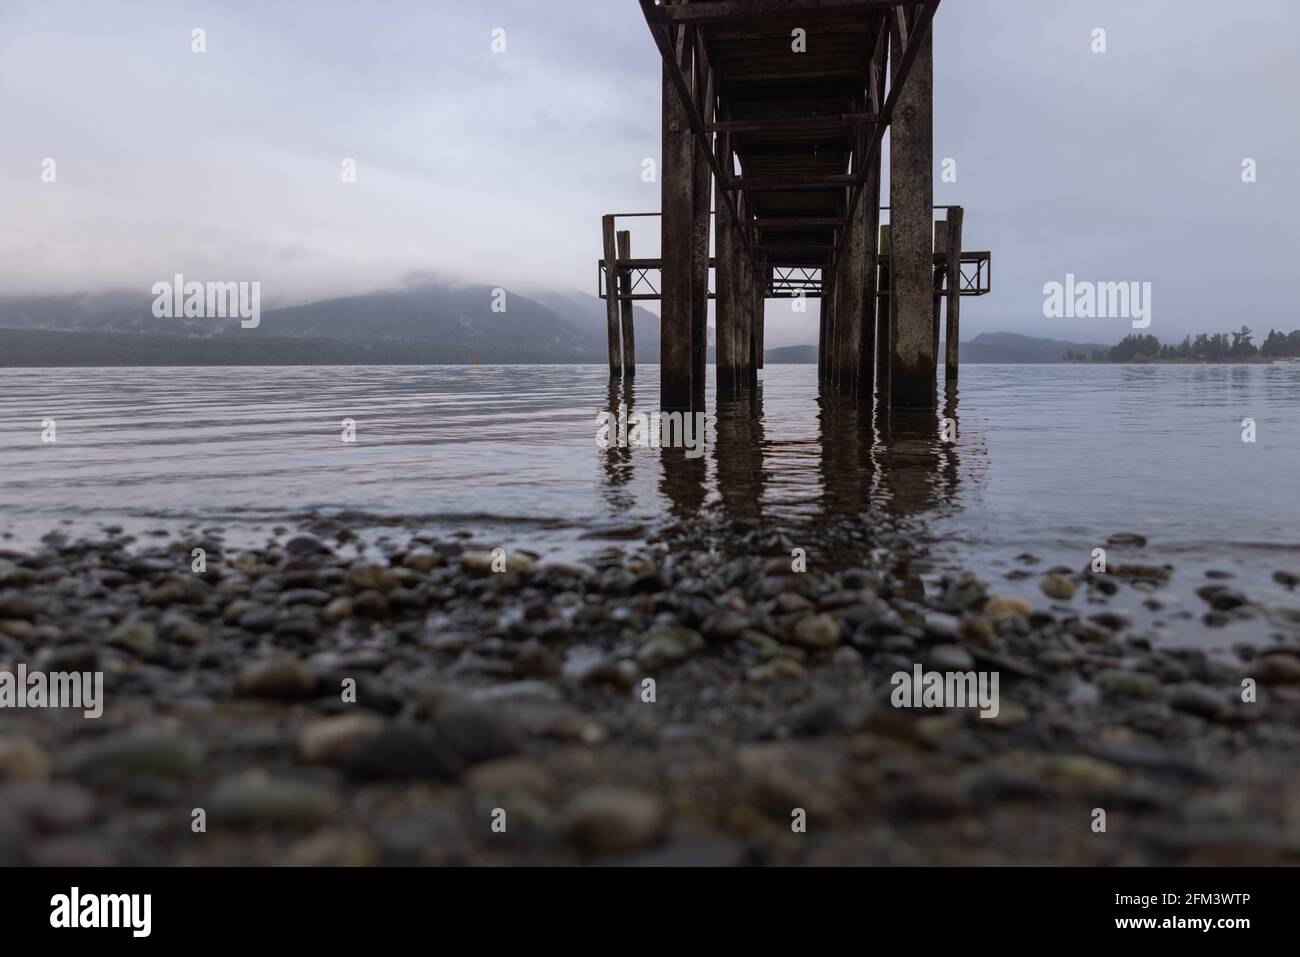 Under a Jetty on a Bleak Morning, Te Anau, South Island, New Zealand Stock Photo